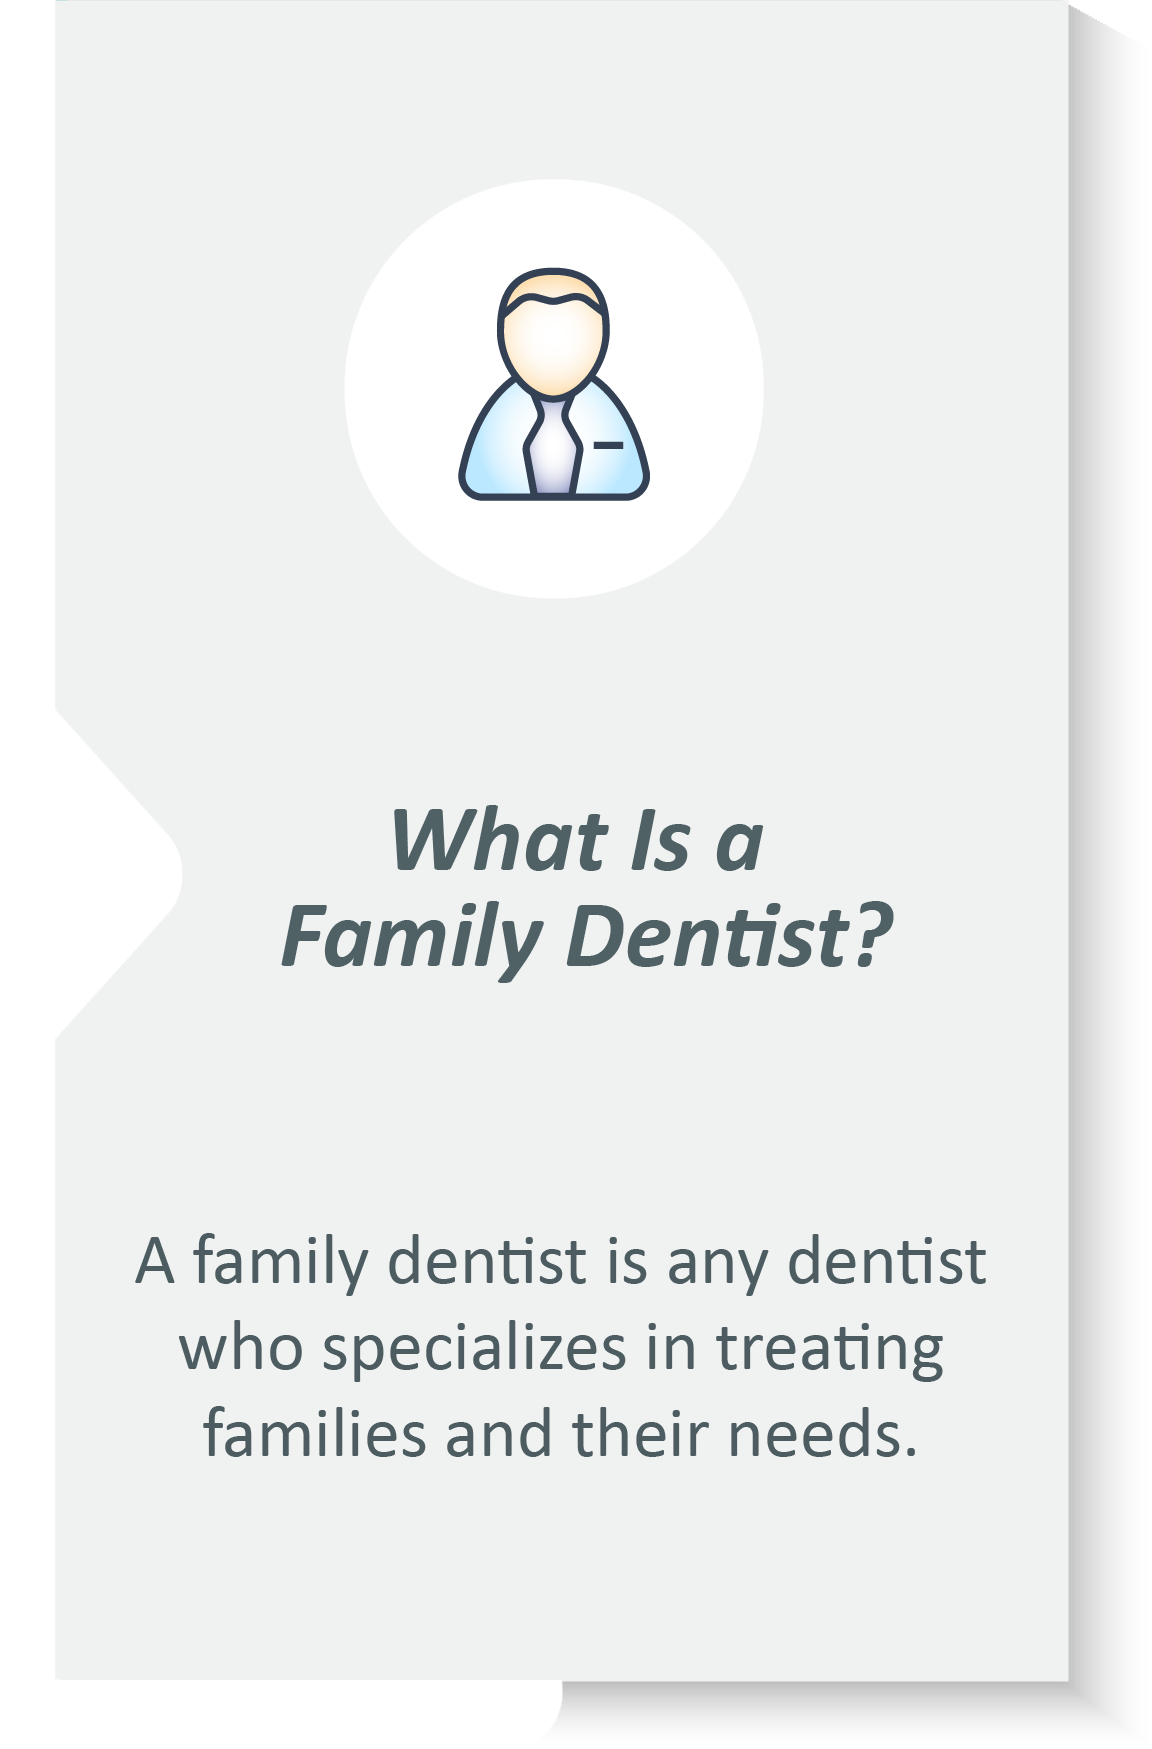 Family dentist infographic: A family dentist is any dentist who specializes in treating families and their needs.